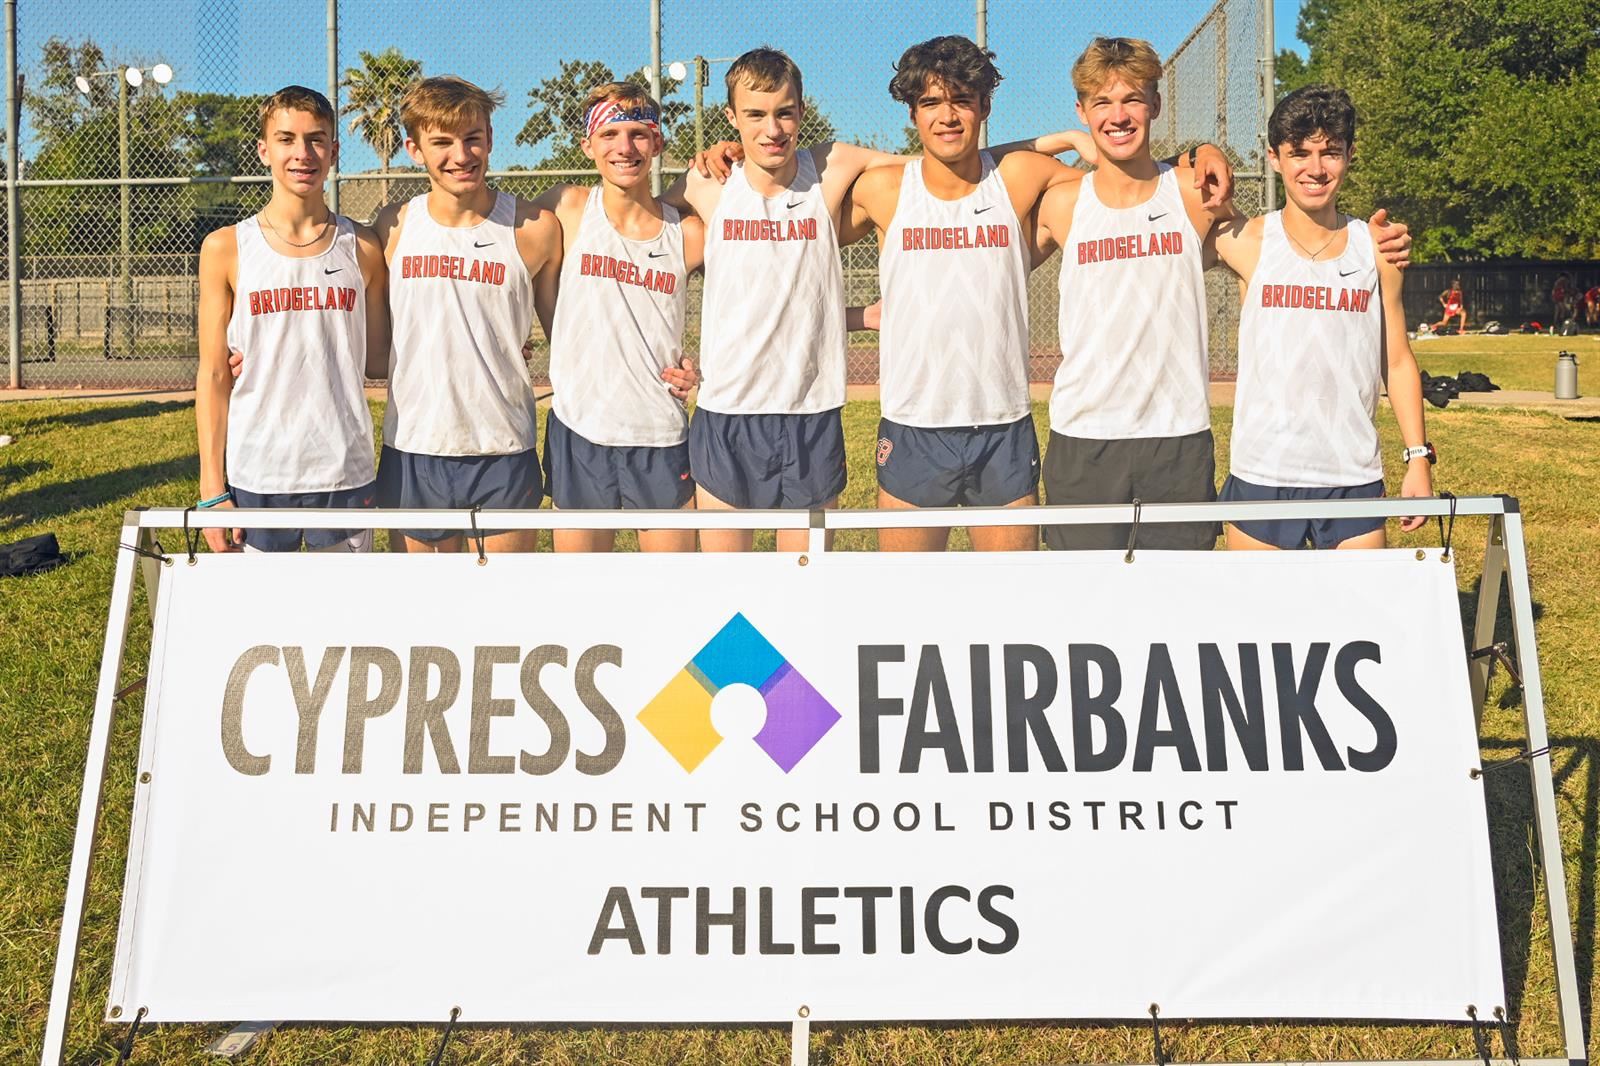 The Bridgeland boys’ cross country team placed ninth overall as a team at the UIL Cross Country State Championships.